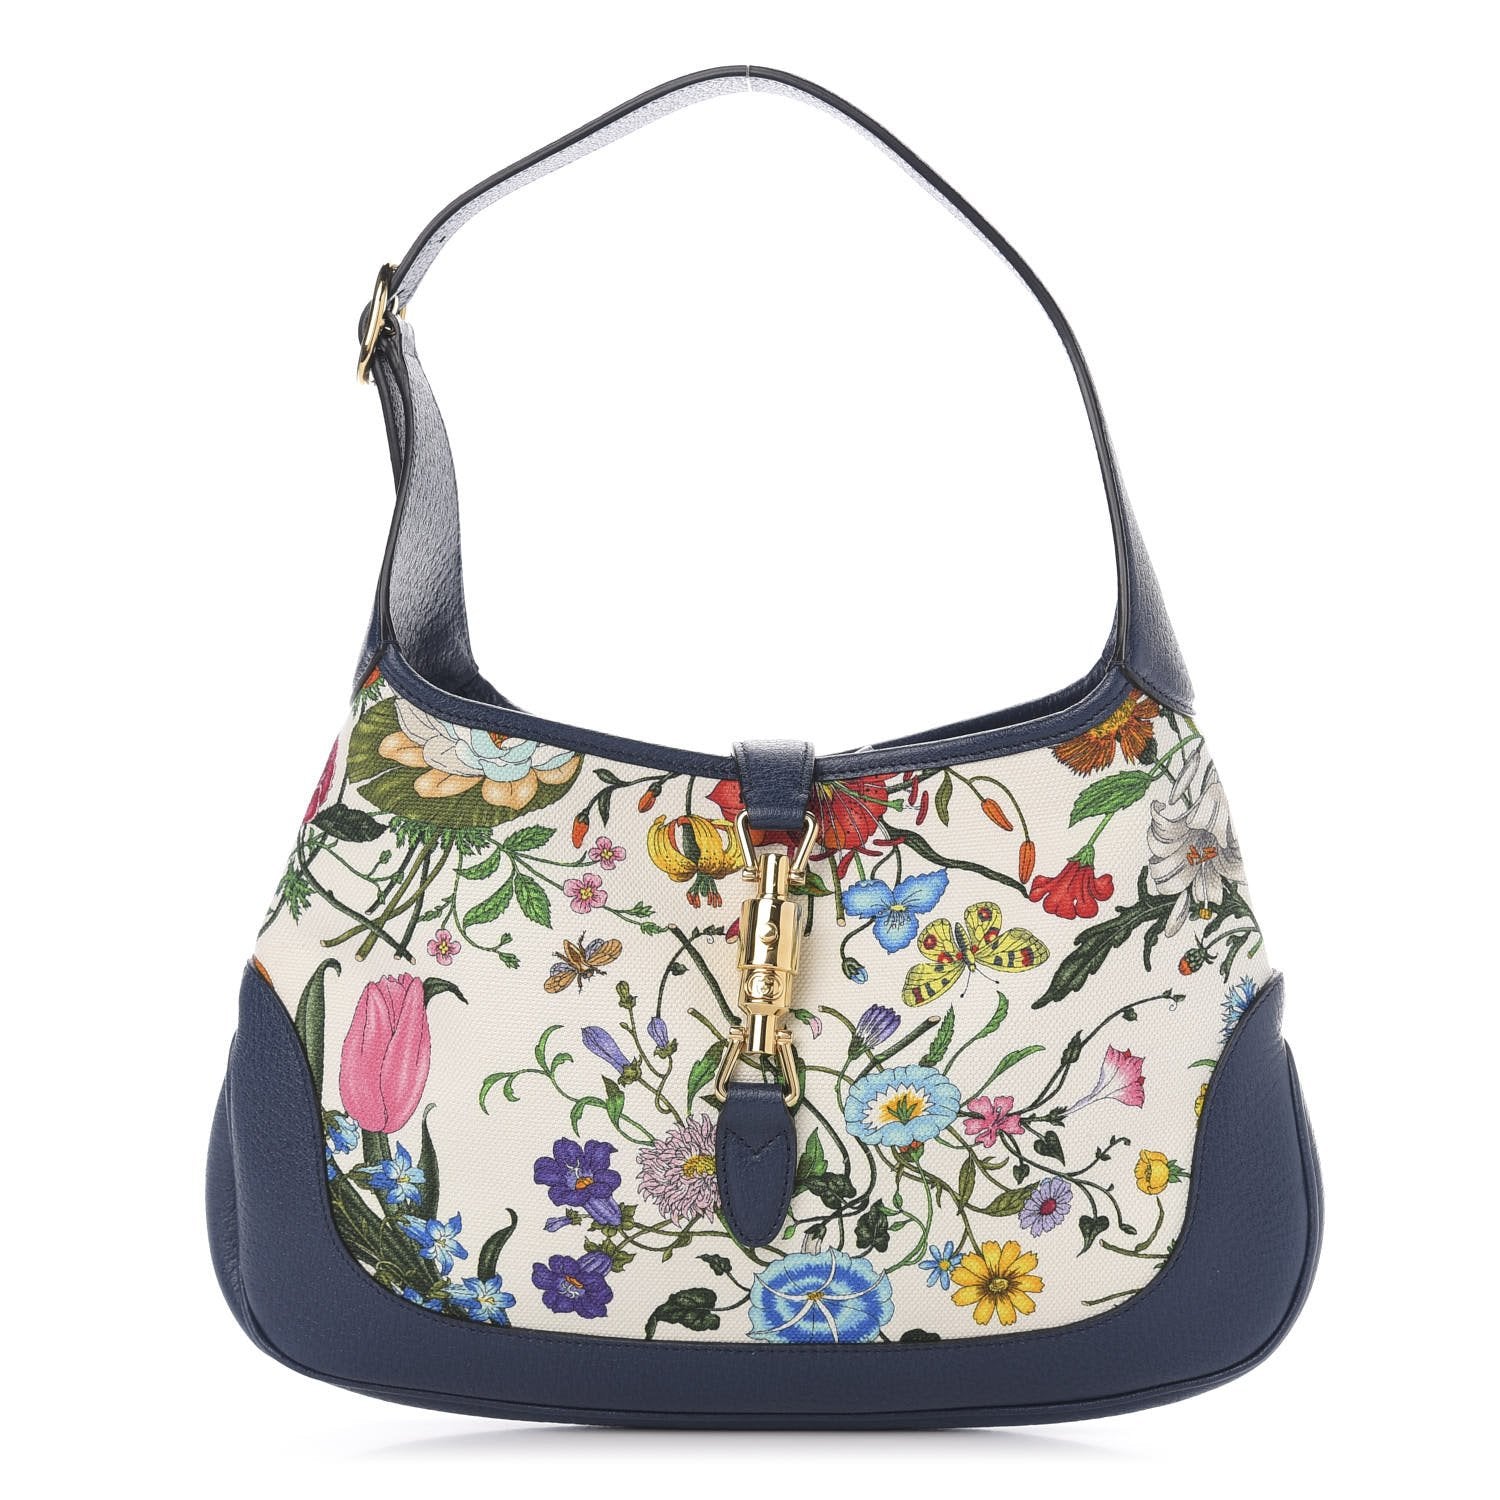 Gucci Jackie Flora Canvas White Blue Agata Hobo Bag 550152 at_Queen_Bee_of_Beverly_Hills